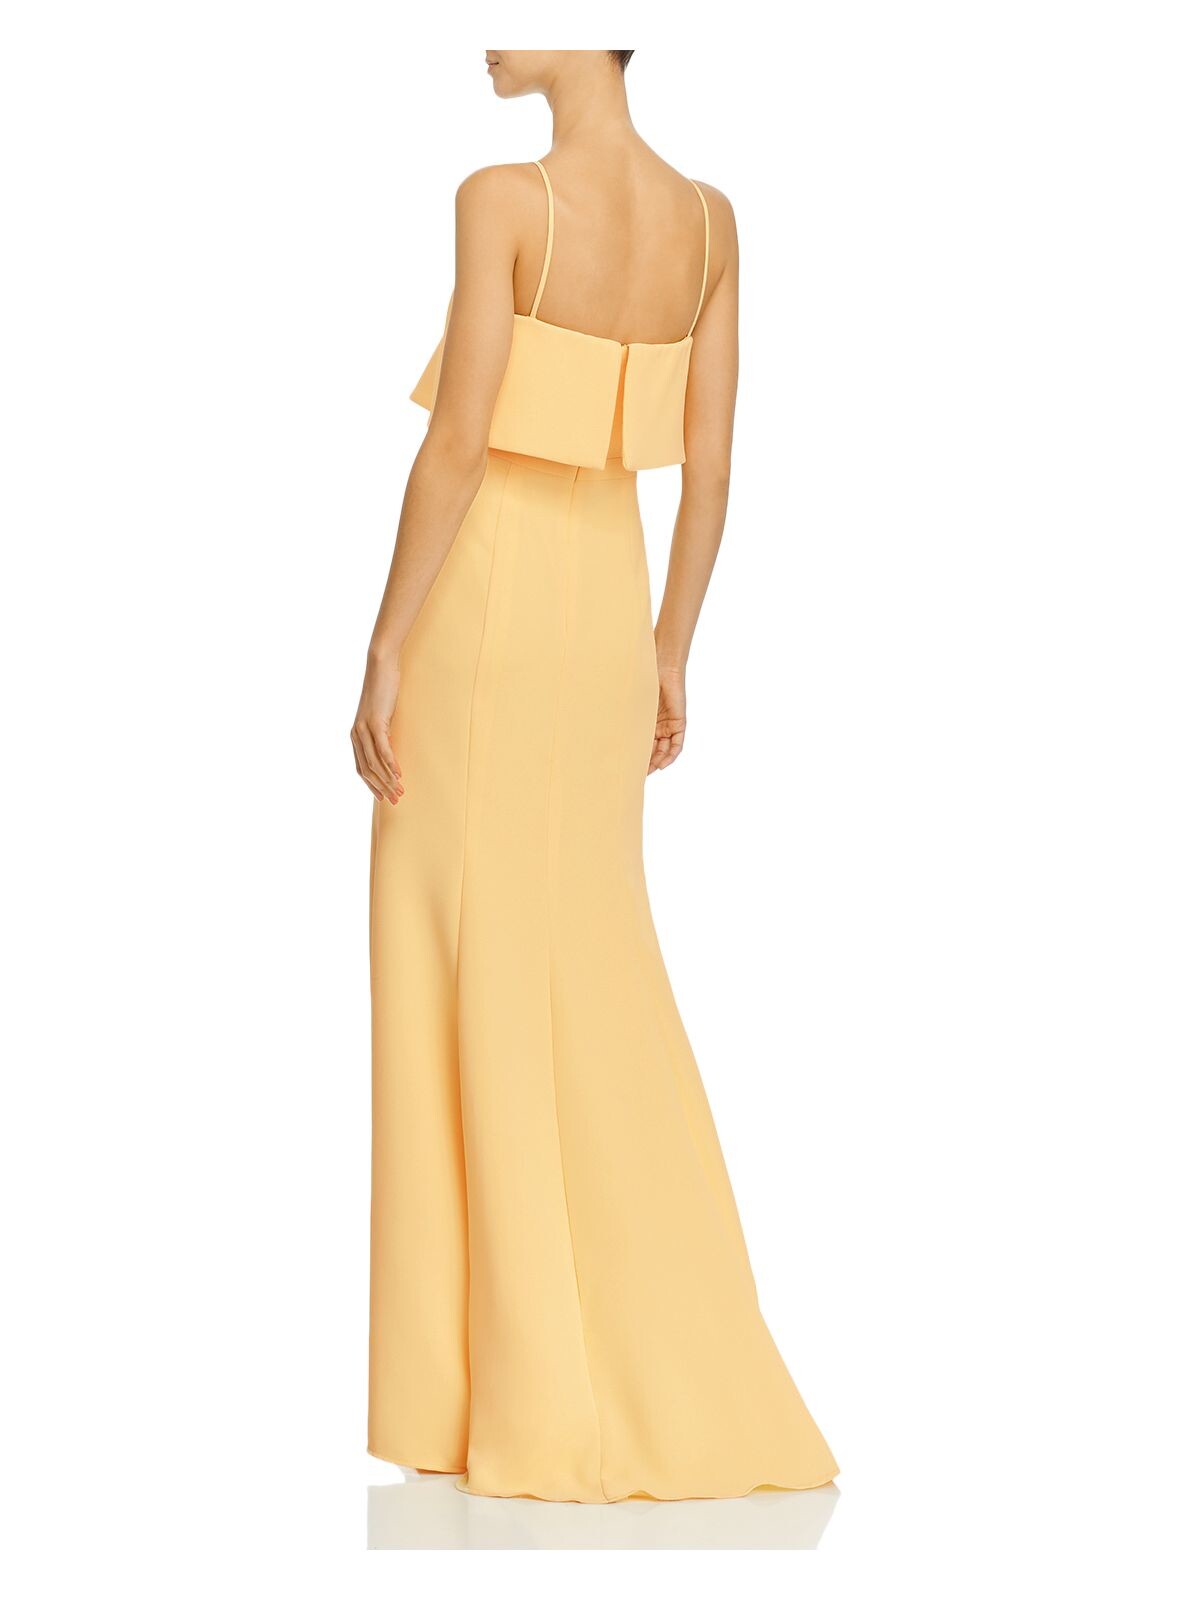 AQUA FORMAL Womens Yellow Zippered Slitted Lined Spaghetti Strap Scoop Neck Full-Length Evening Gown Dress 2